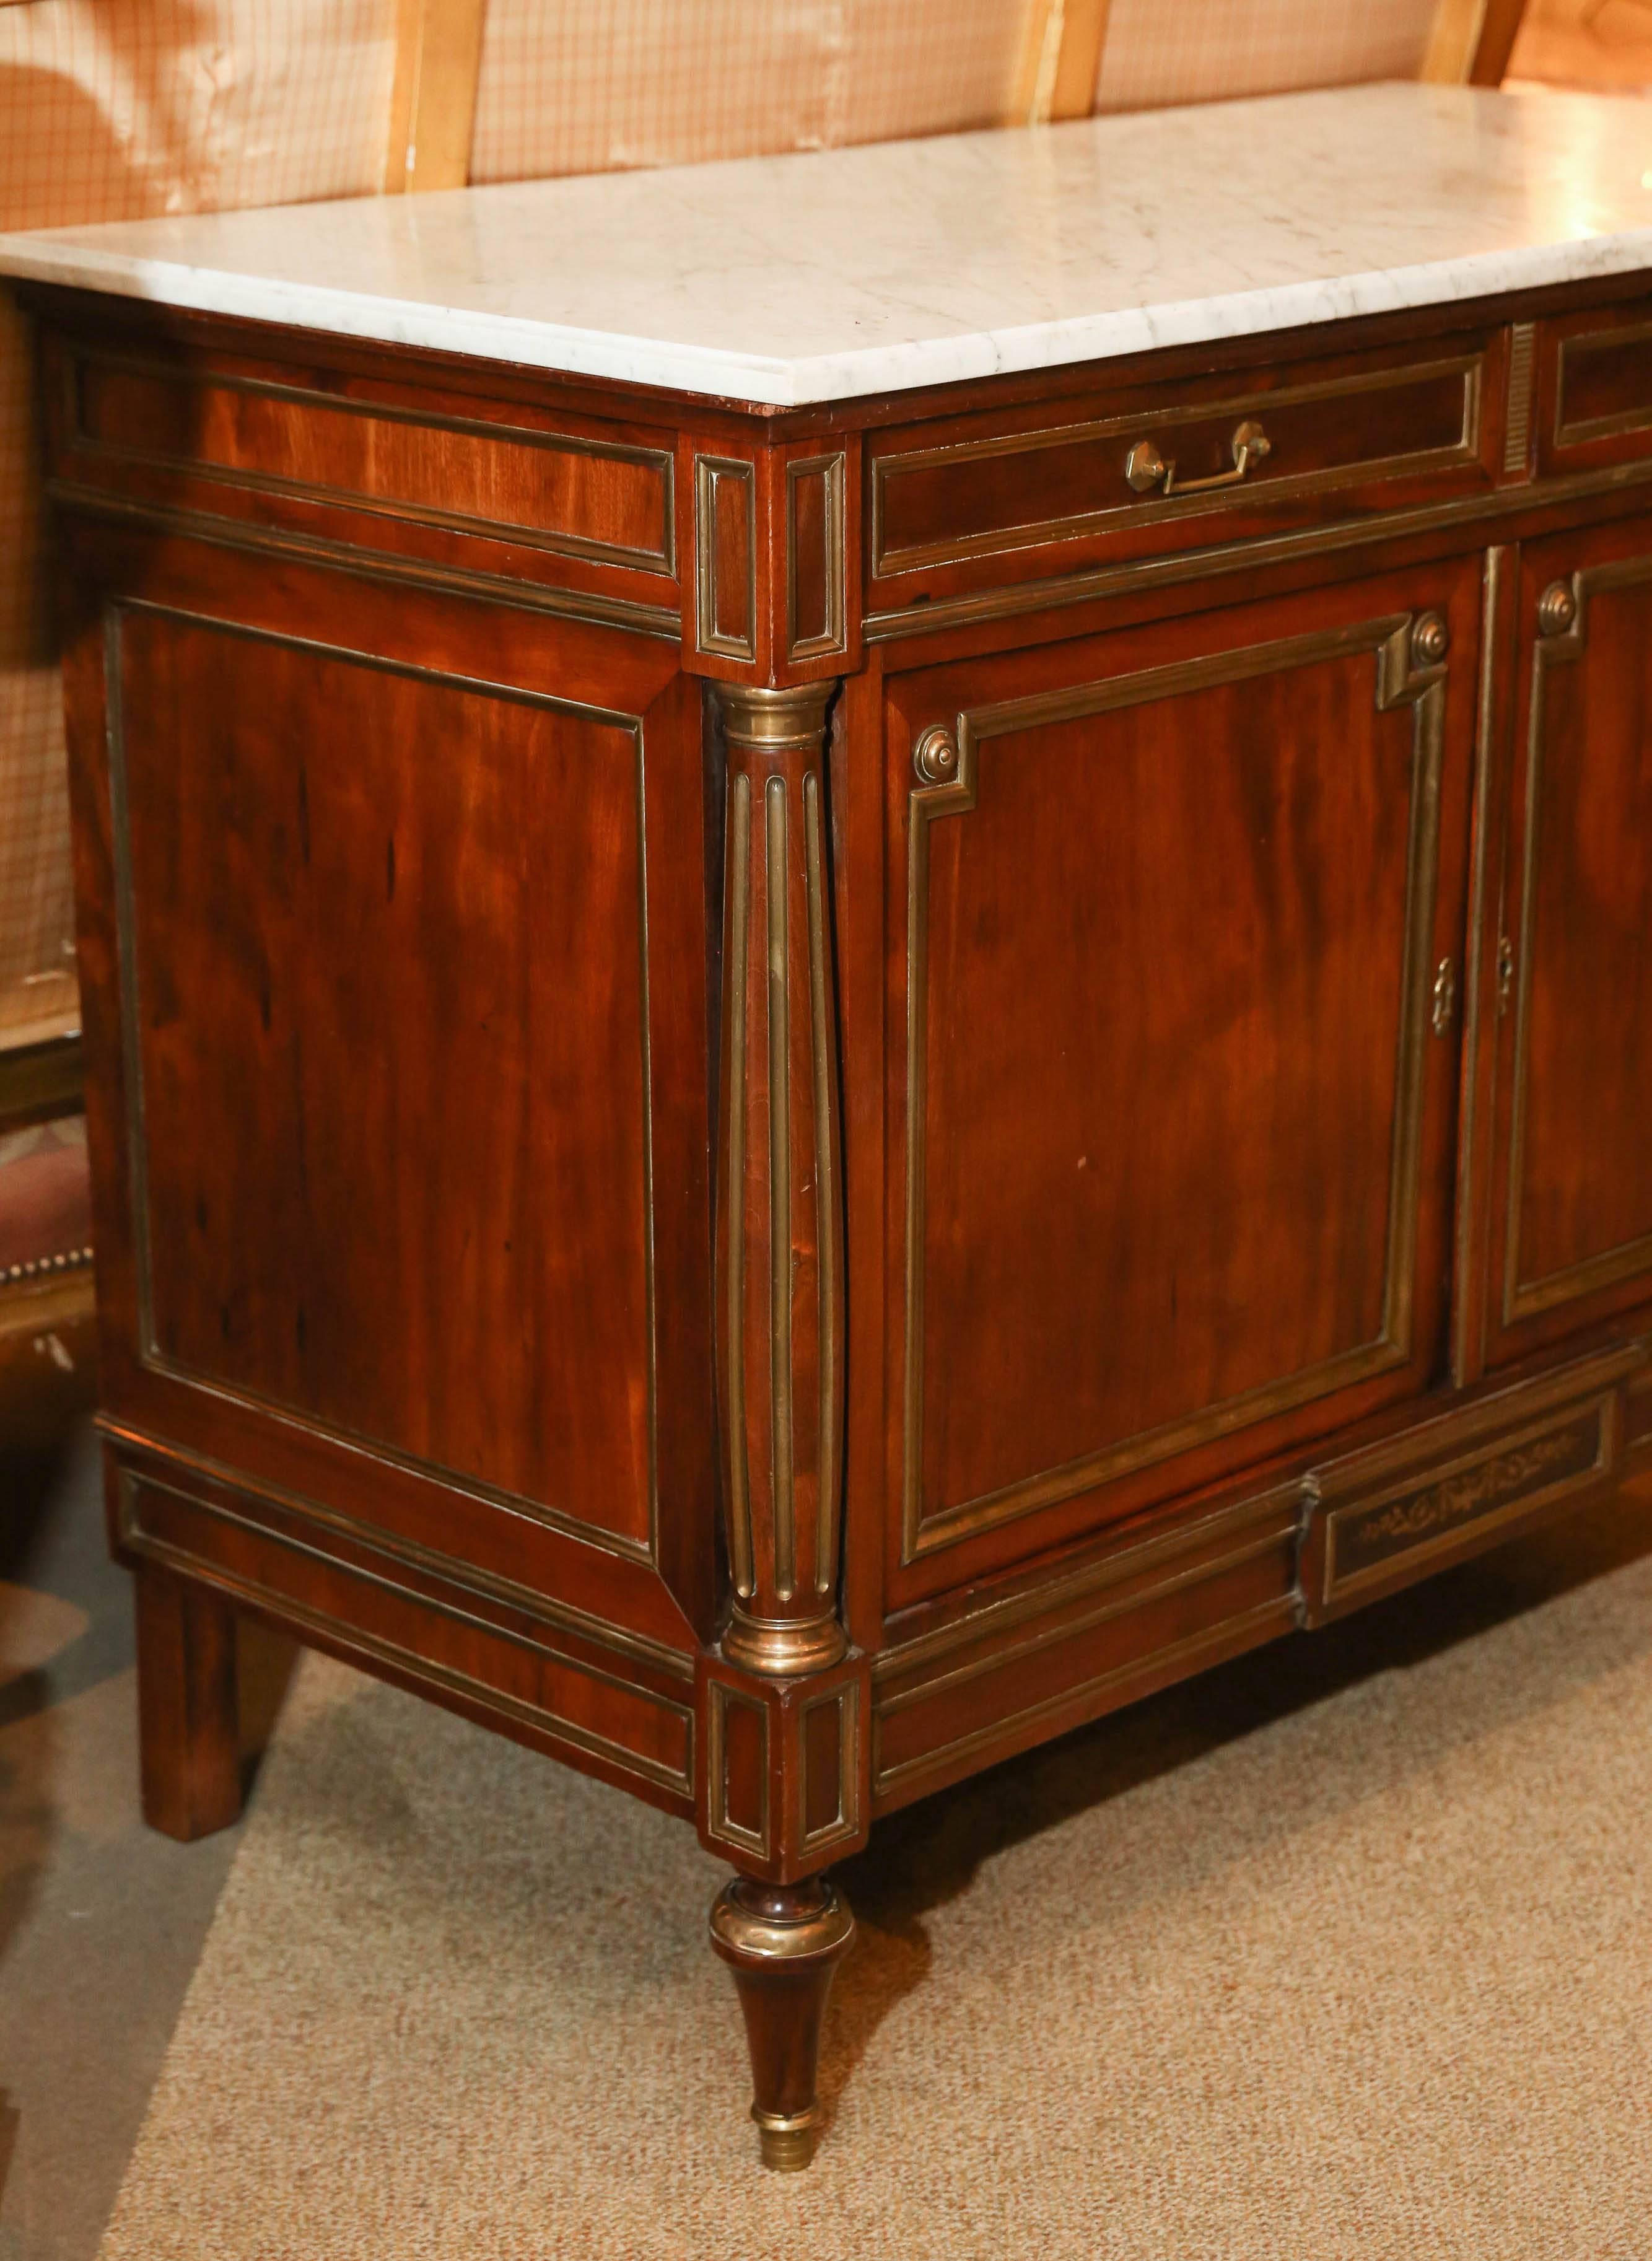 Early 20th century, white marble top with a molded edge, above a case
fitted with two drawers over two paneled cabinet doors, all with brass banding
flanked to either side by a flute upright, raised on brass accented toupee feet.